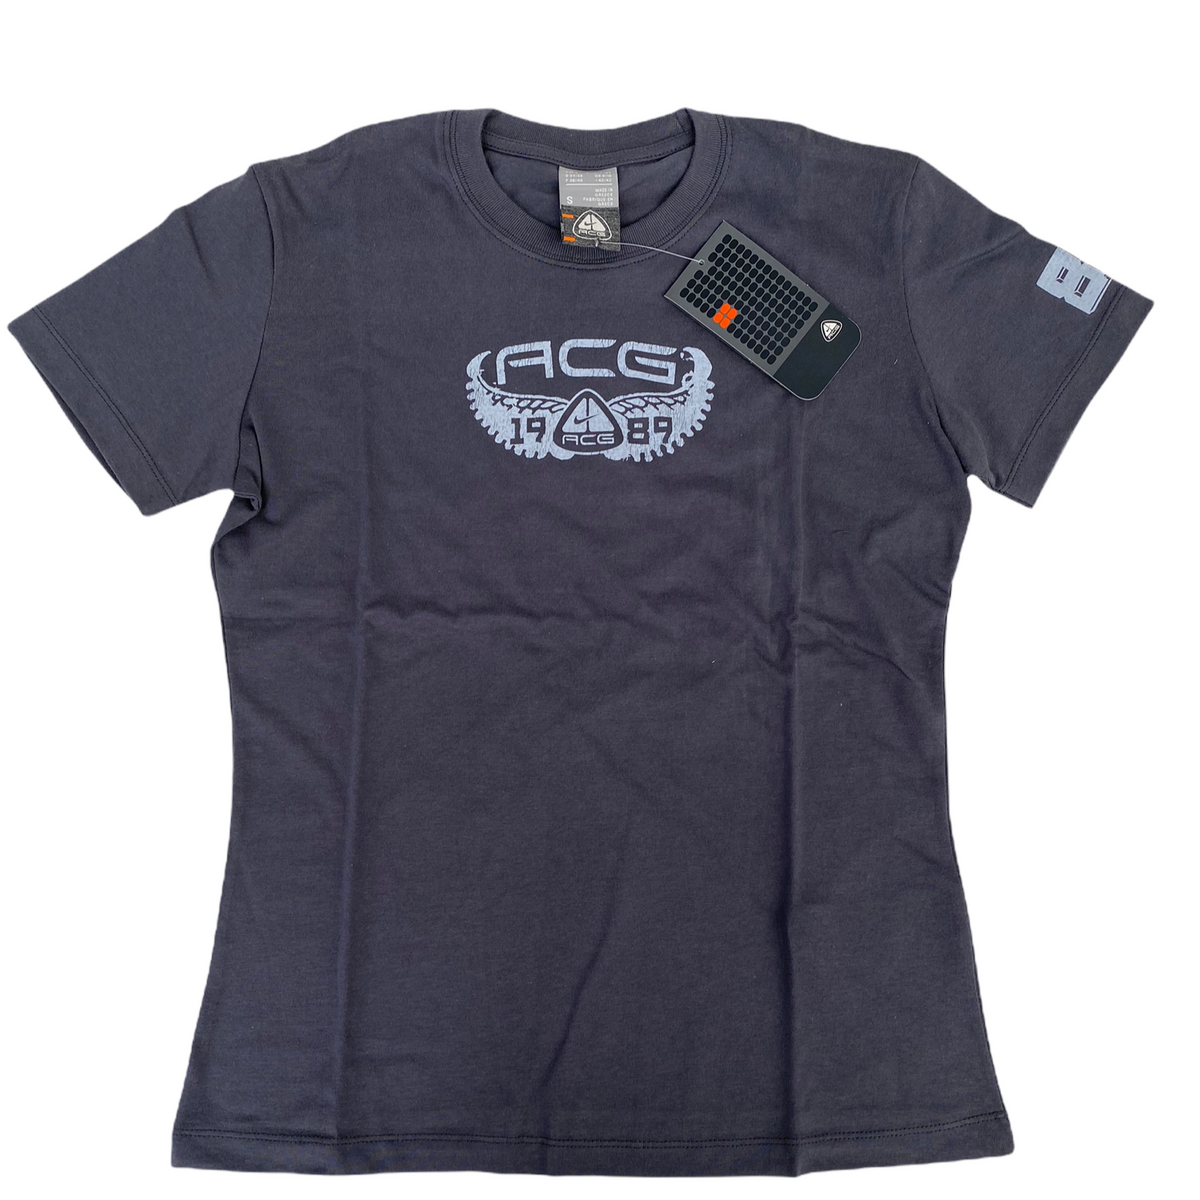 NIKE ACG WOMANS 1989 GRAPHIC T-SHIRT - Not In Your Wardrobe™ - [Vendor]